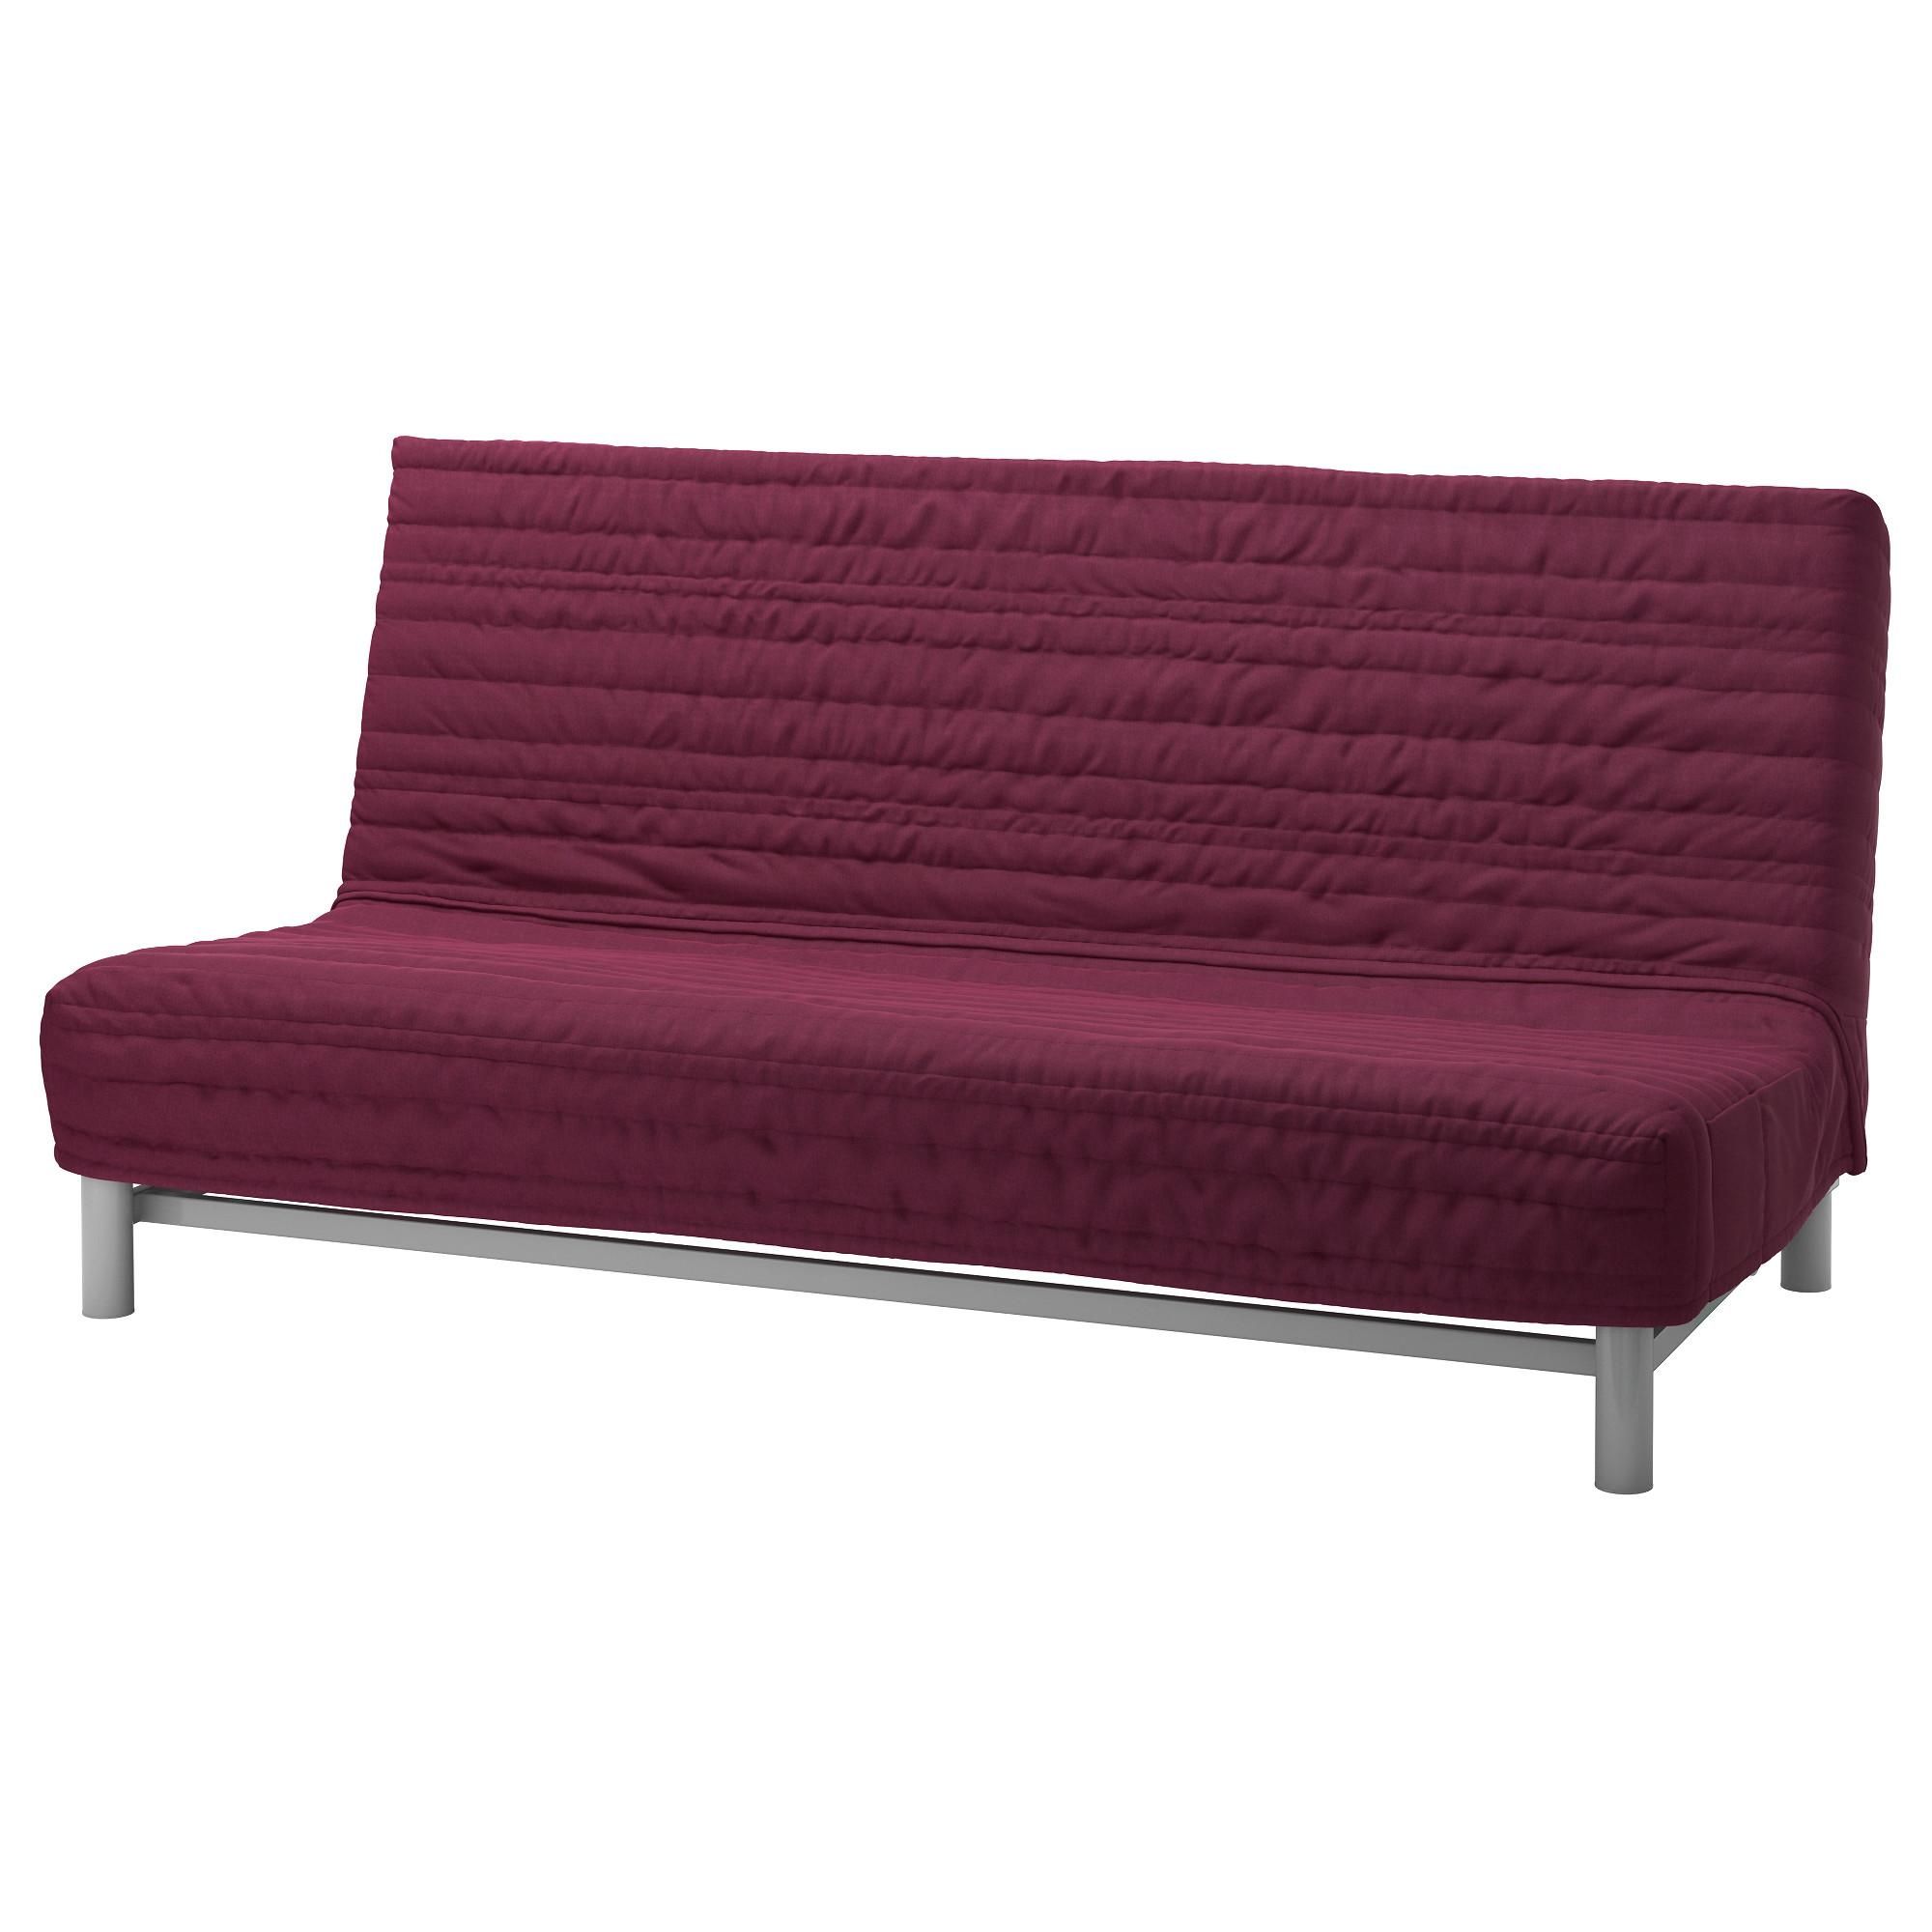 Furniture: Luxury Sofa Bed Ikea For Home Furniture Ideas — Nysben With Regard To Ikea Single Sofa Beds (View 21 of 23)